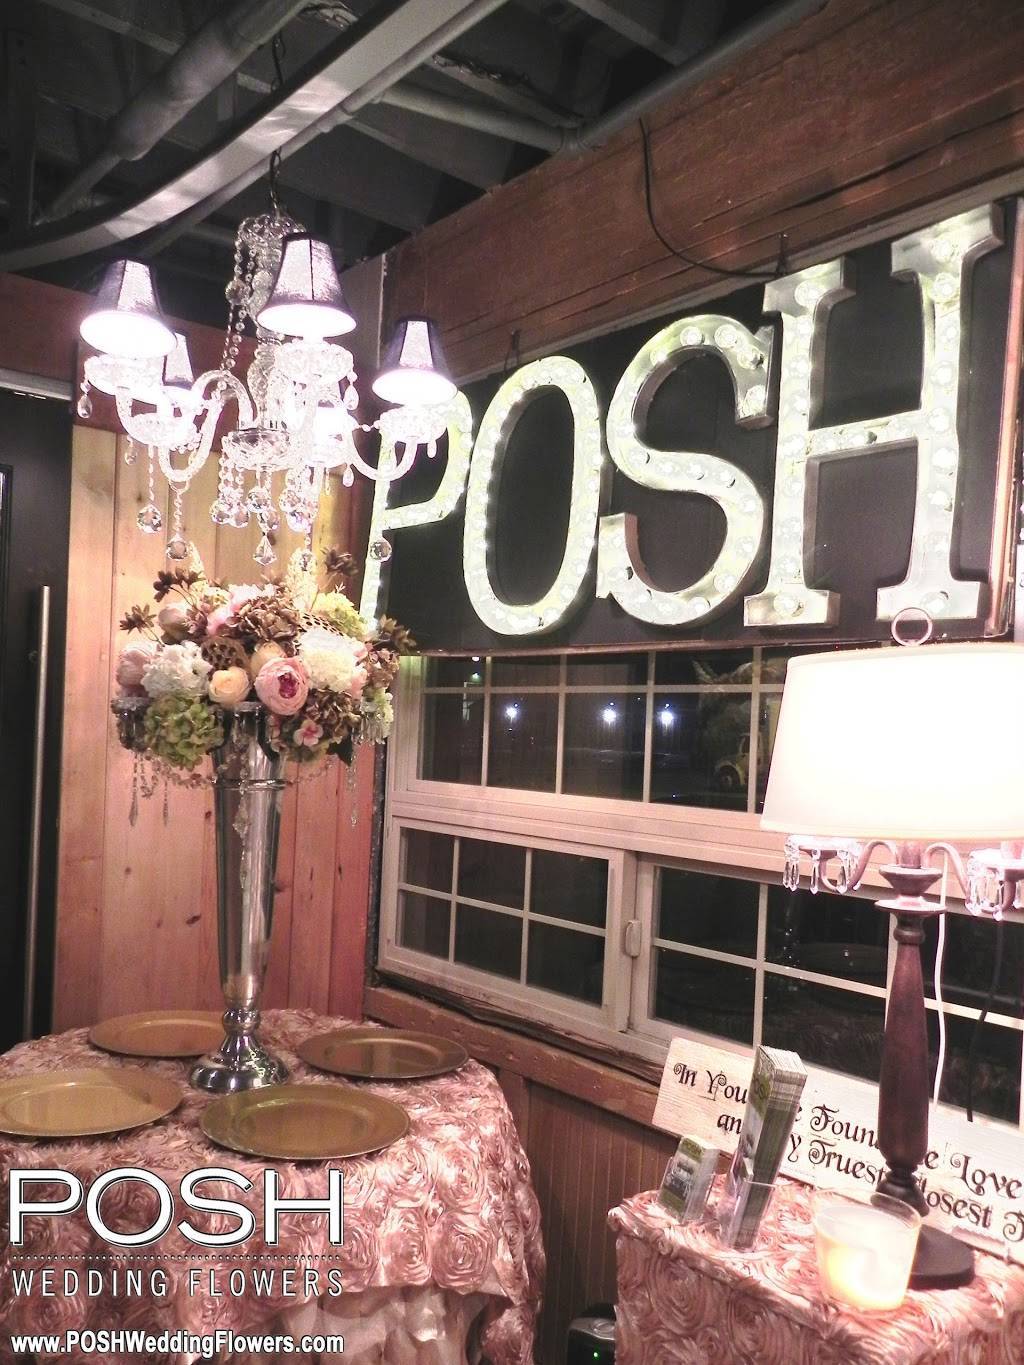 POSH Wedding Flowers | by appointment only, 3201 1st Ave S Suite 111, Seattle, WA 98134, USA | Phone: (253) 380-3500